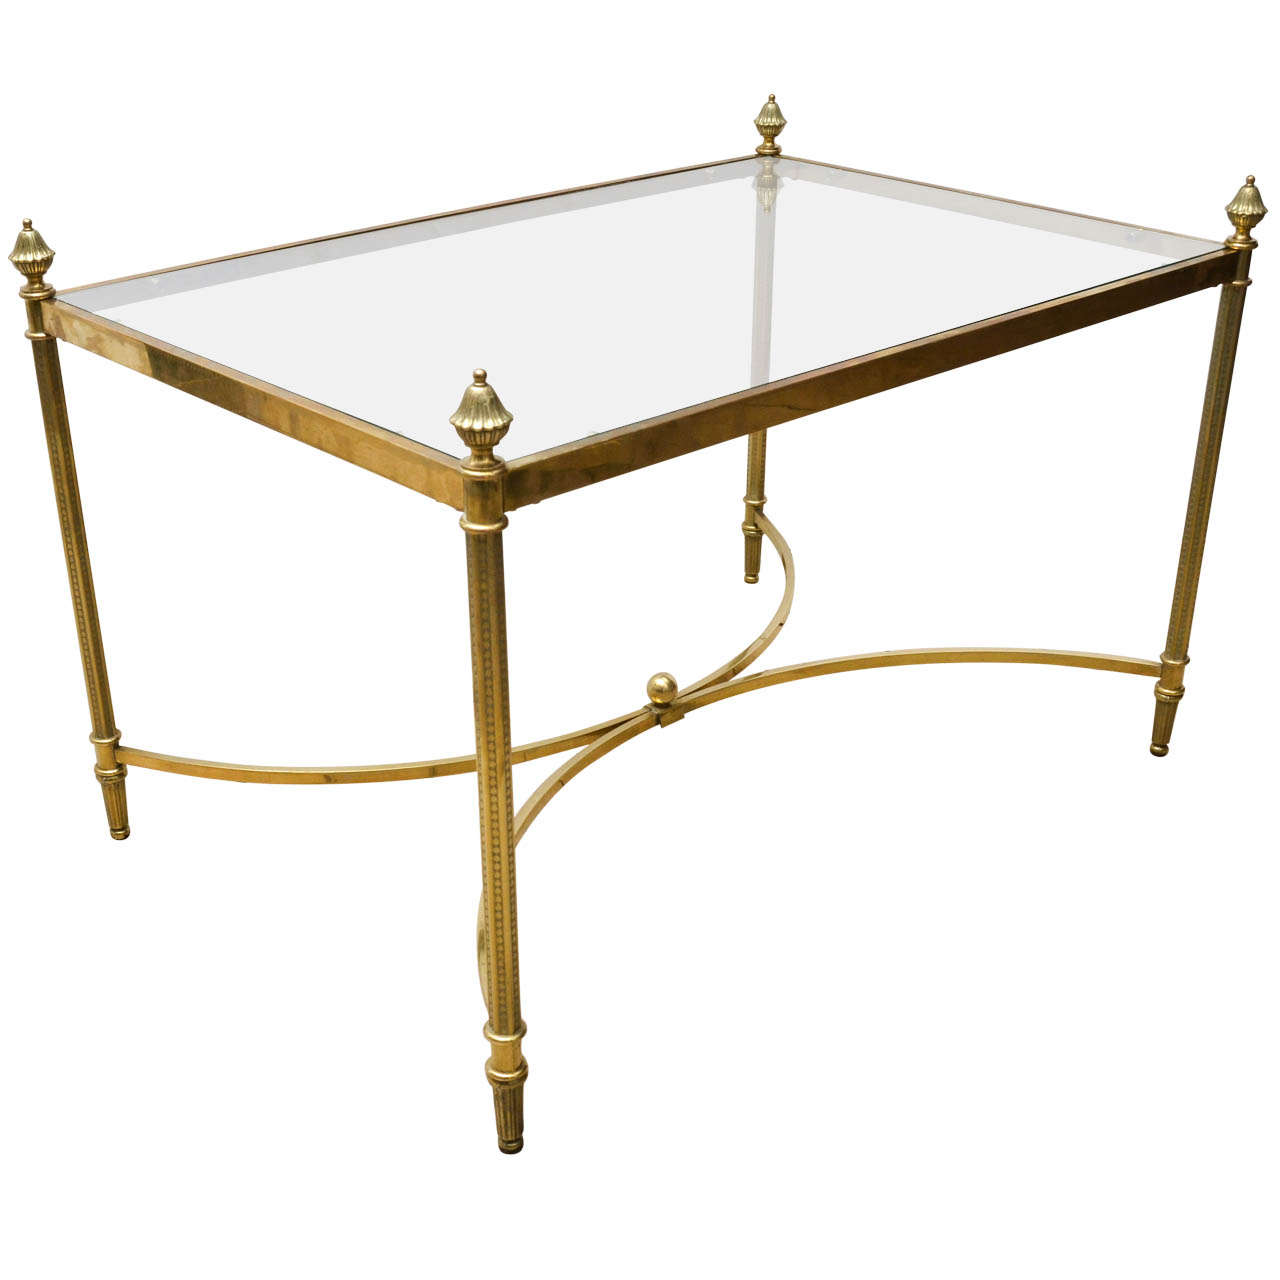 Brass and Glass Side Table with Acorn Finials by Bagues